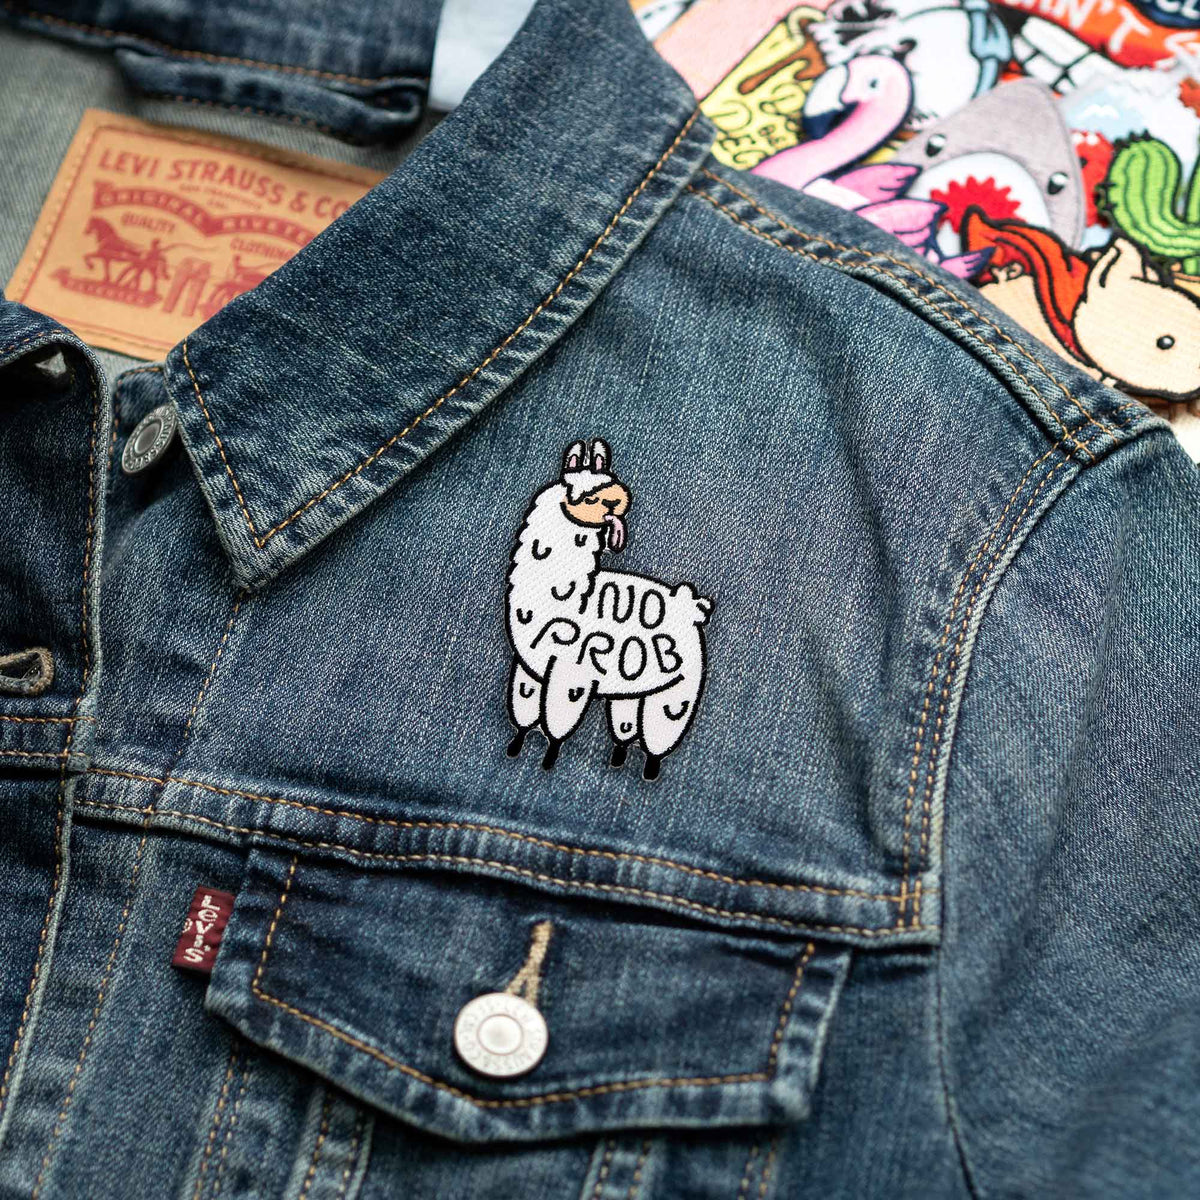 Denim Inside Backing Patch - Iron on Denim Jean Patches - Iron Patches